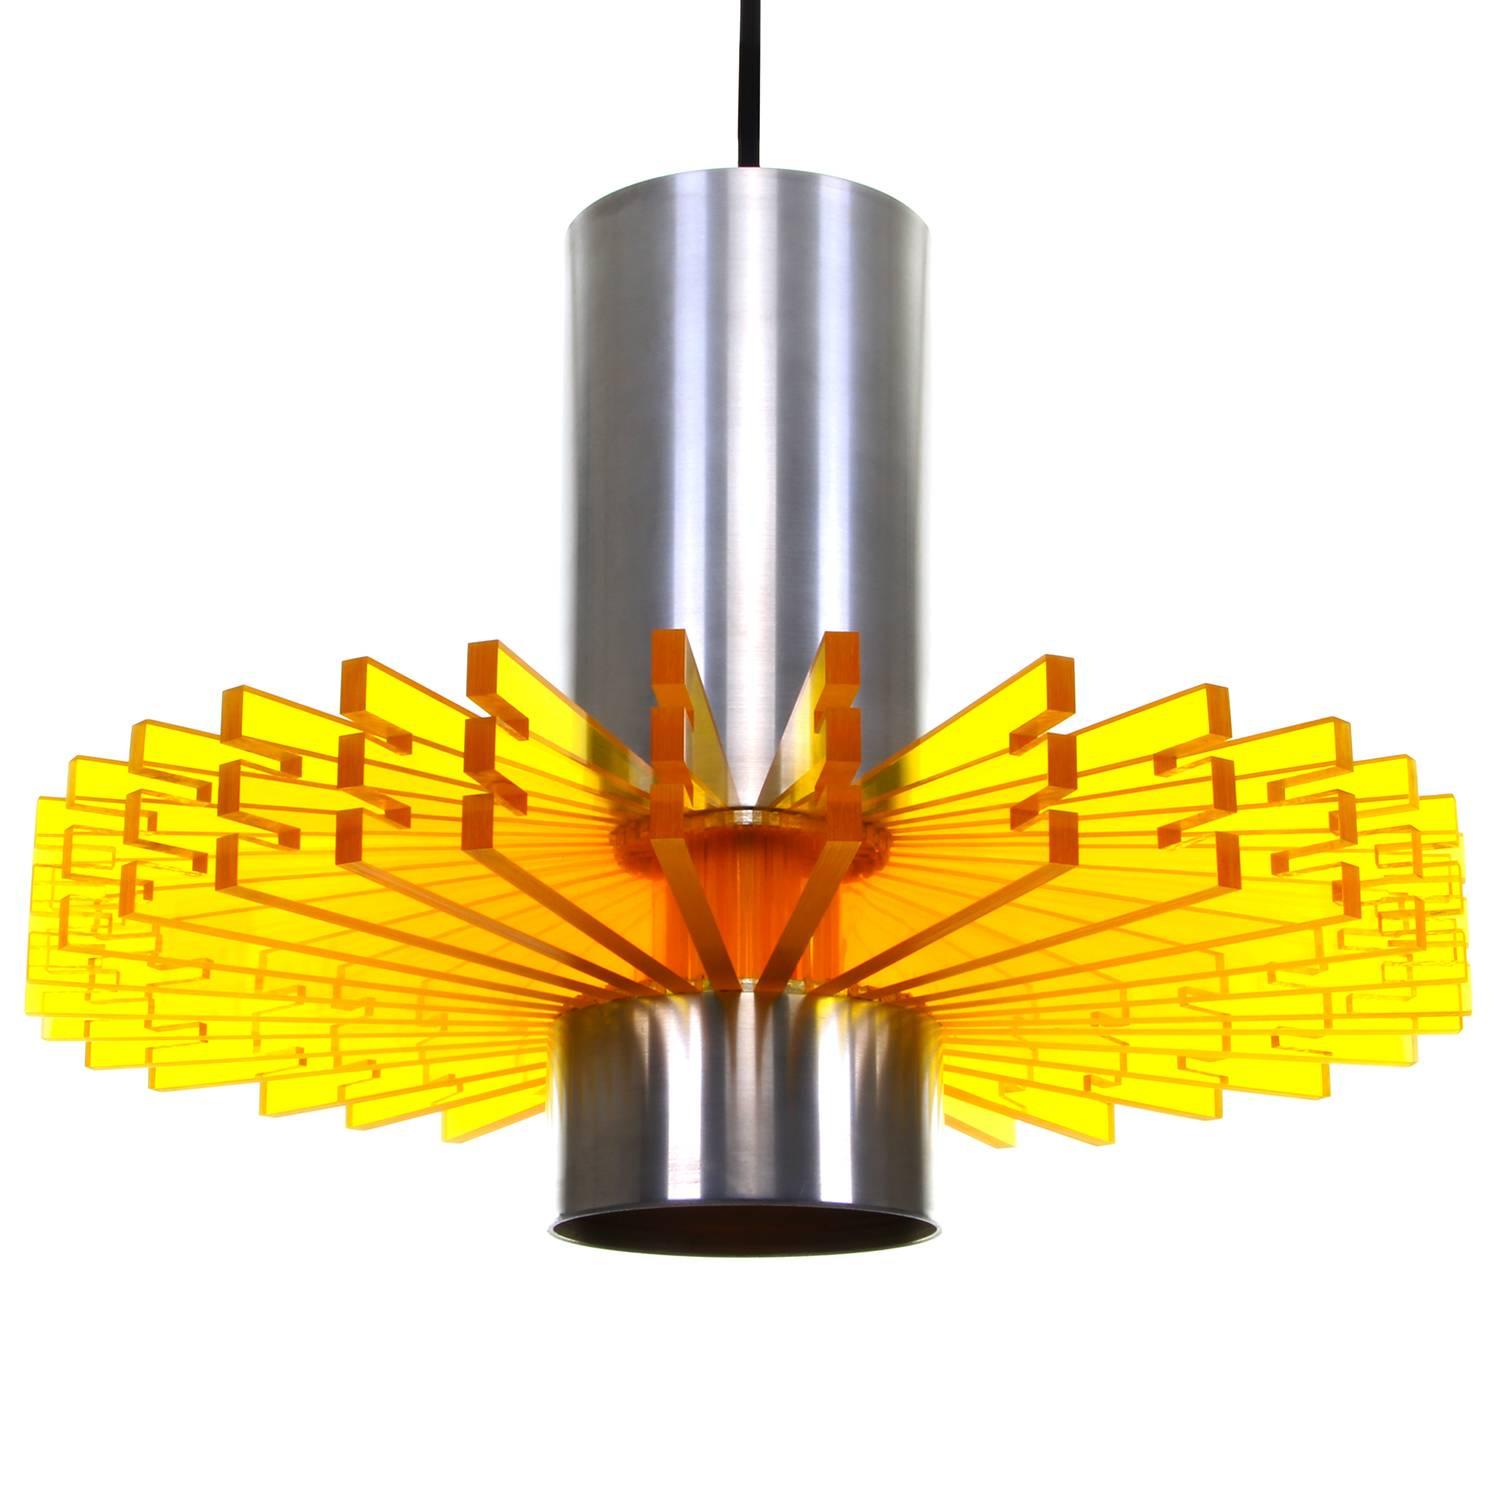 Priest Collar, 'Symfoni' 'Yellow' Pendant Light by Claus Bolby, 1967